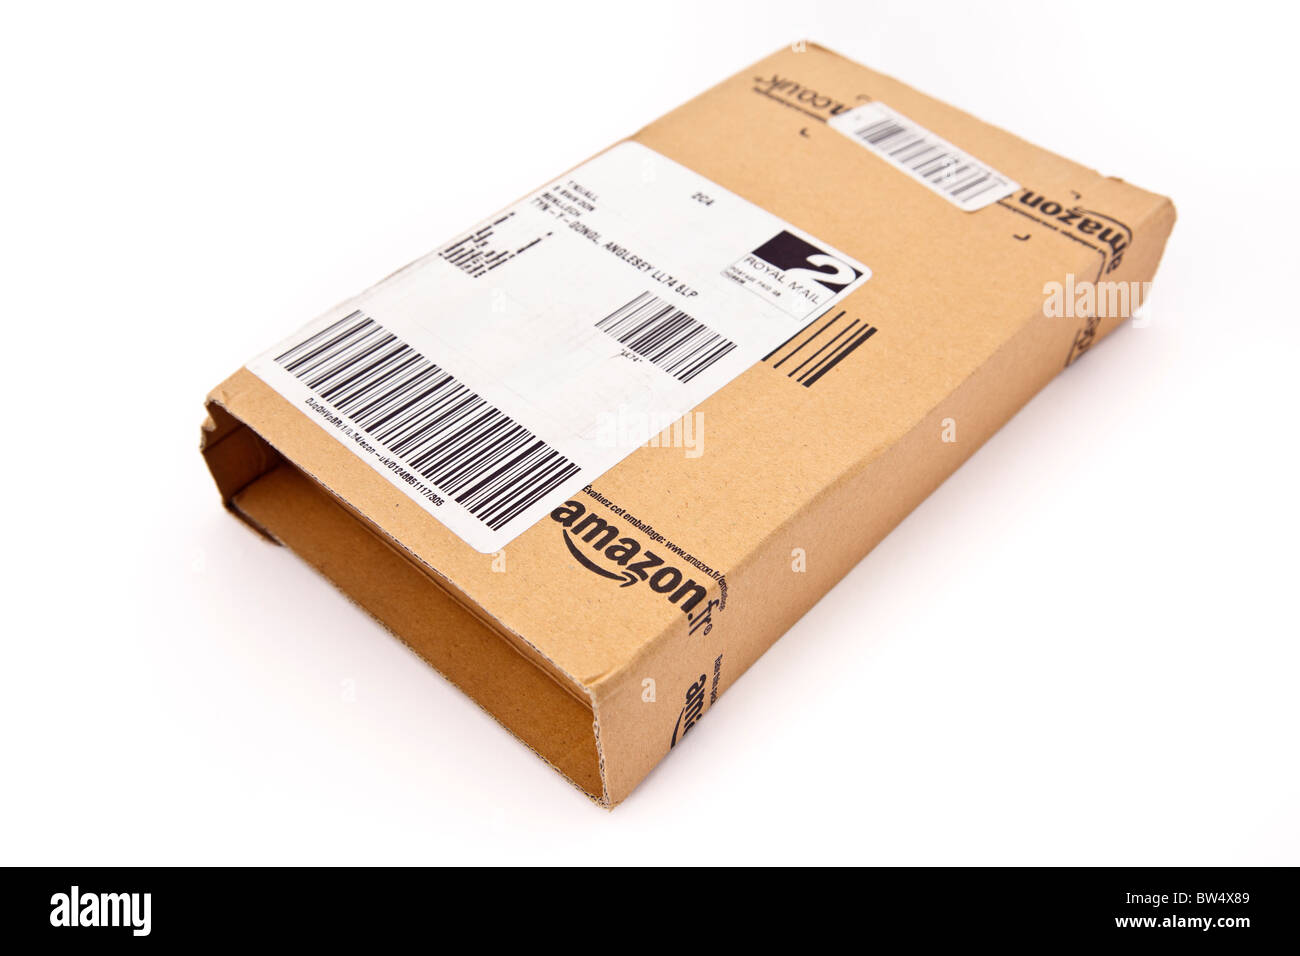 Cardboard package parcel box from Amazon isolated on a white background. Online shopping on internet. UK Stock Photo